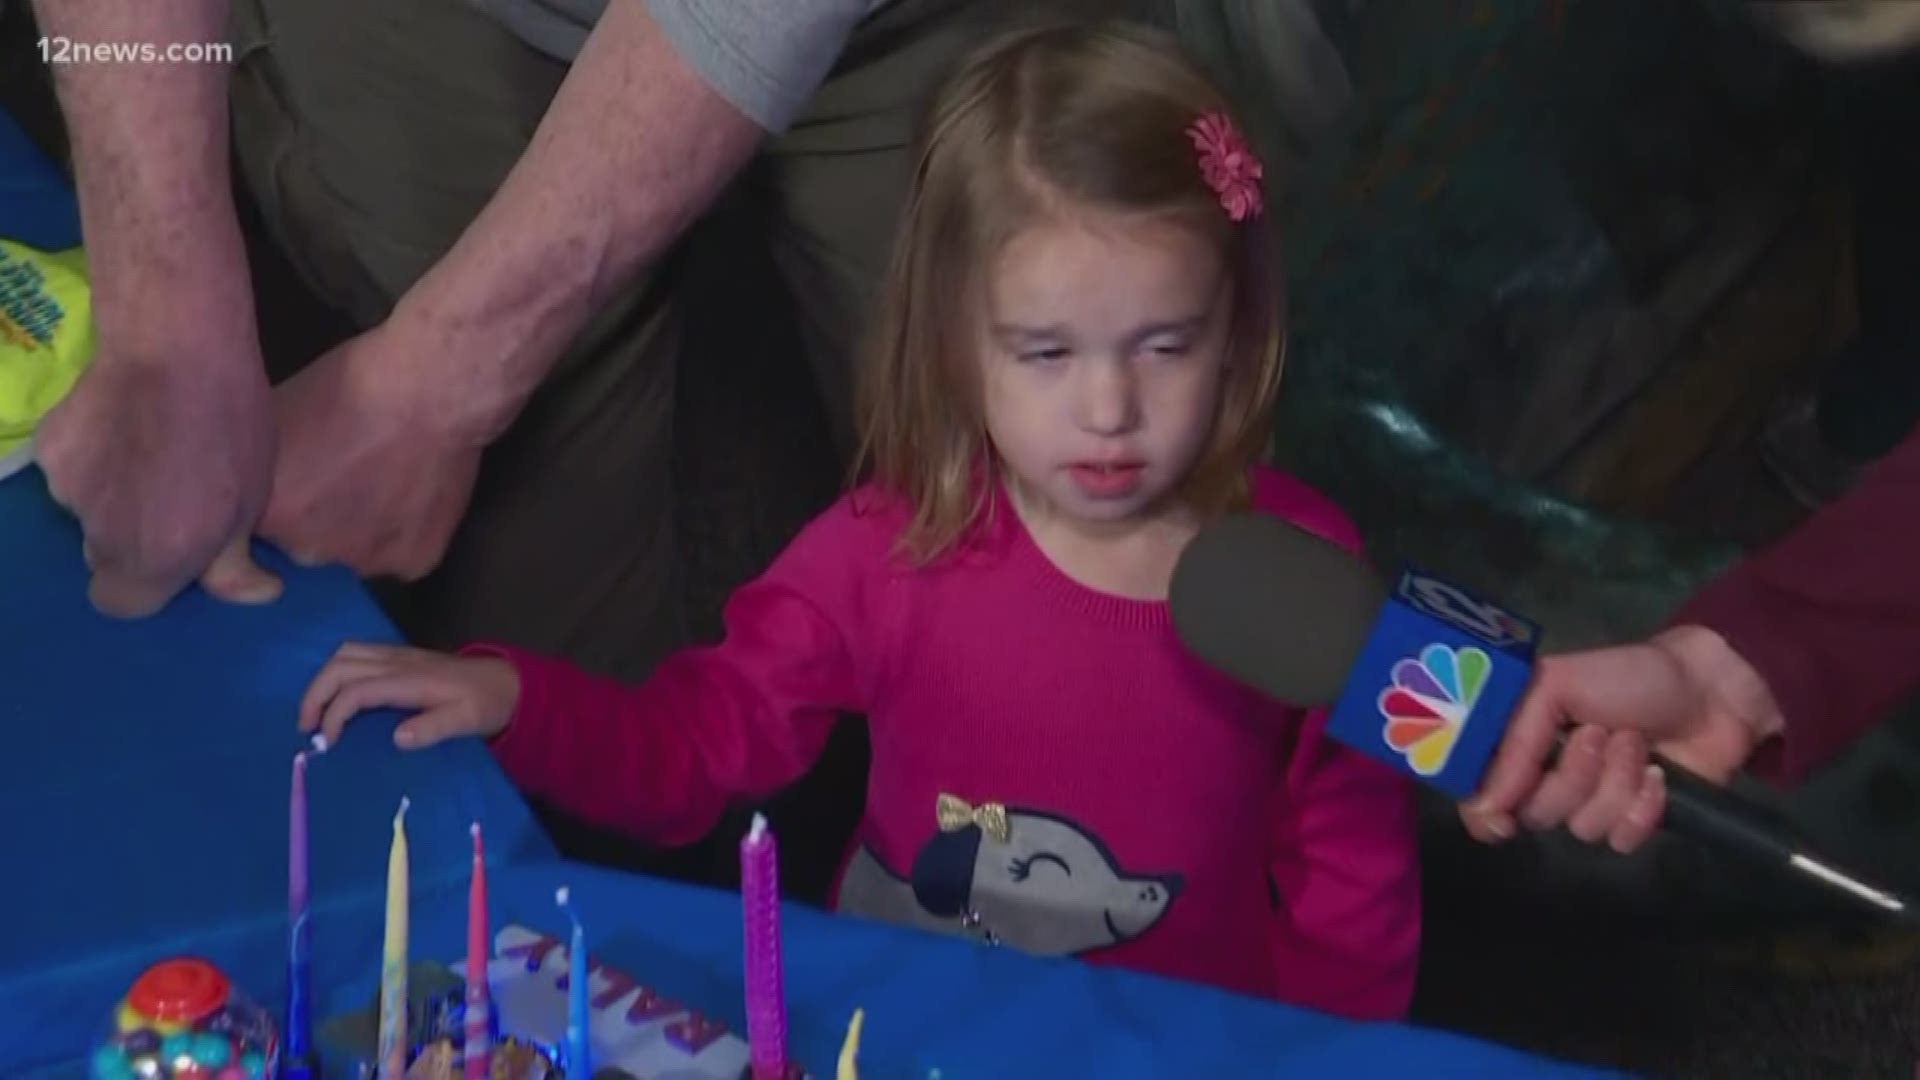 The City of Chandler opened its Hanukkah celebration with a menorah lighting and by naming a winner of a menorah making contest.